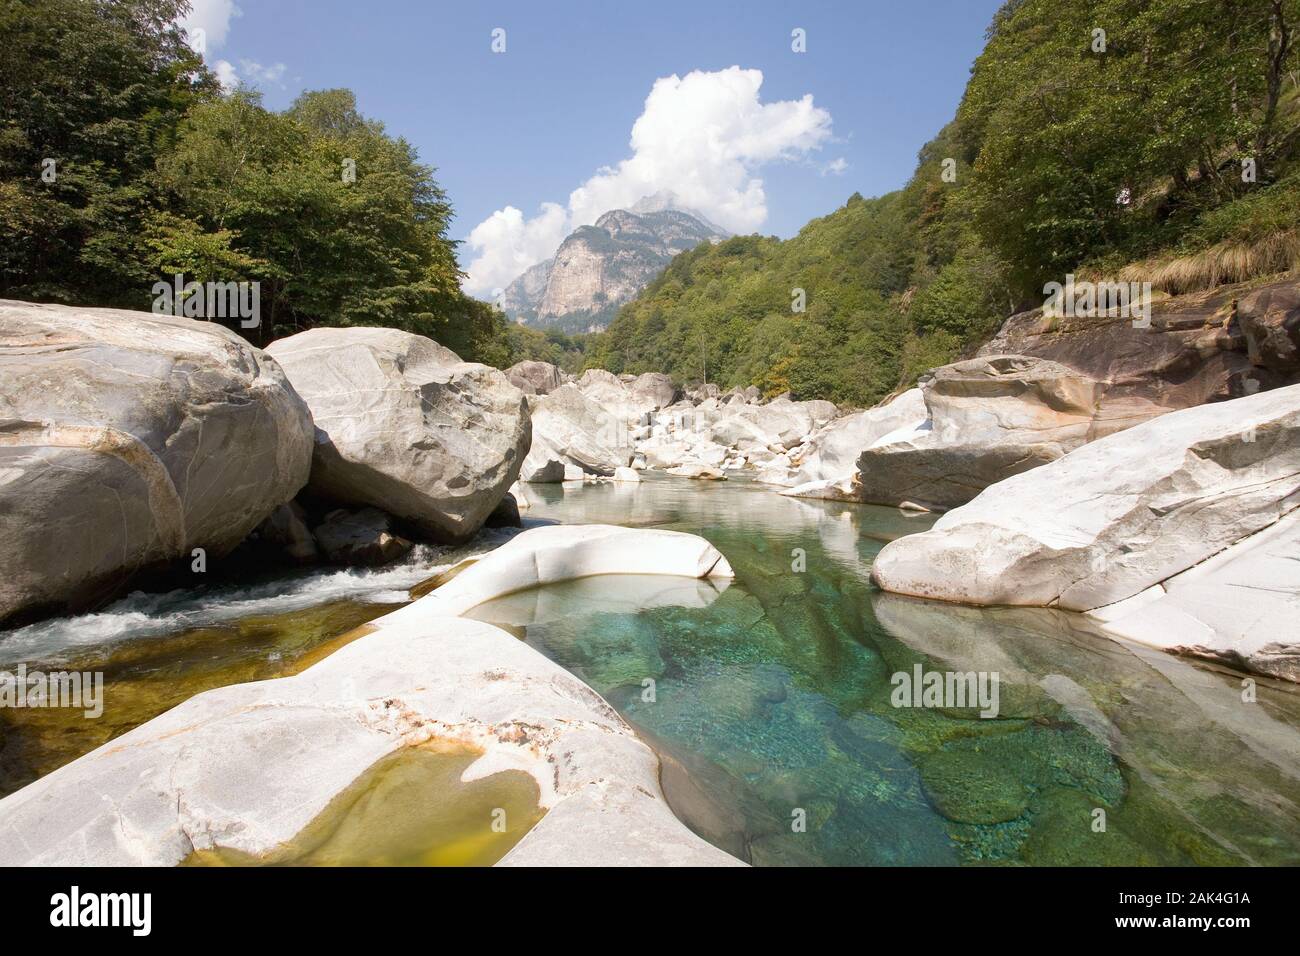 Emerald green the water is gleaming in front of the bizarre rock scenery near Brione in the Valle Verzasca, canton Ticino, Switzerland. (Undated pictu Stock Photo